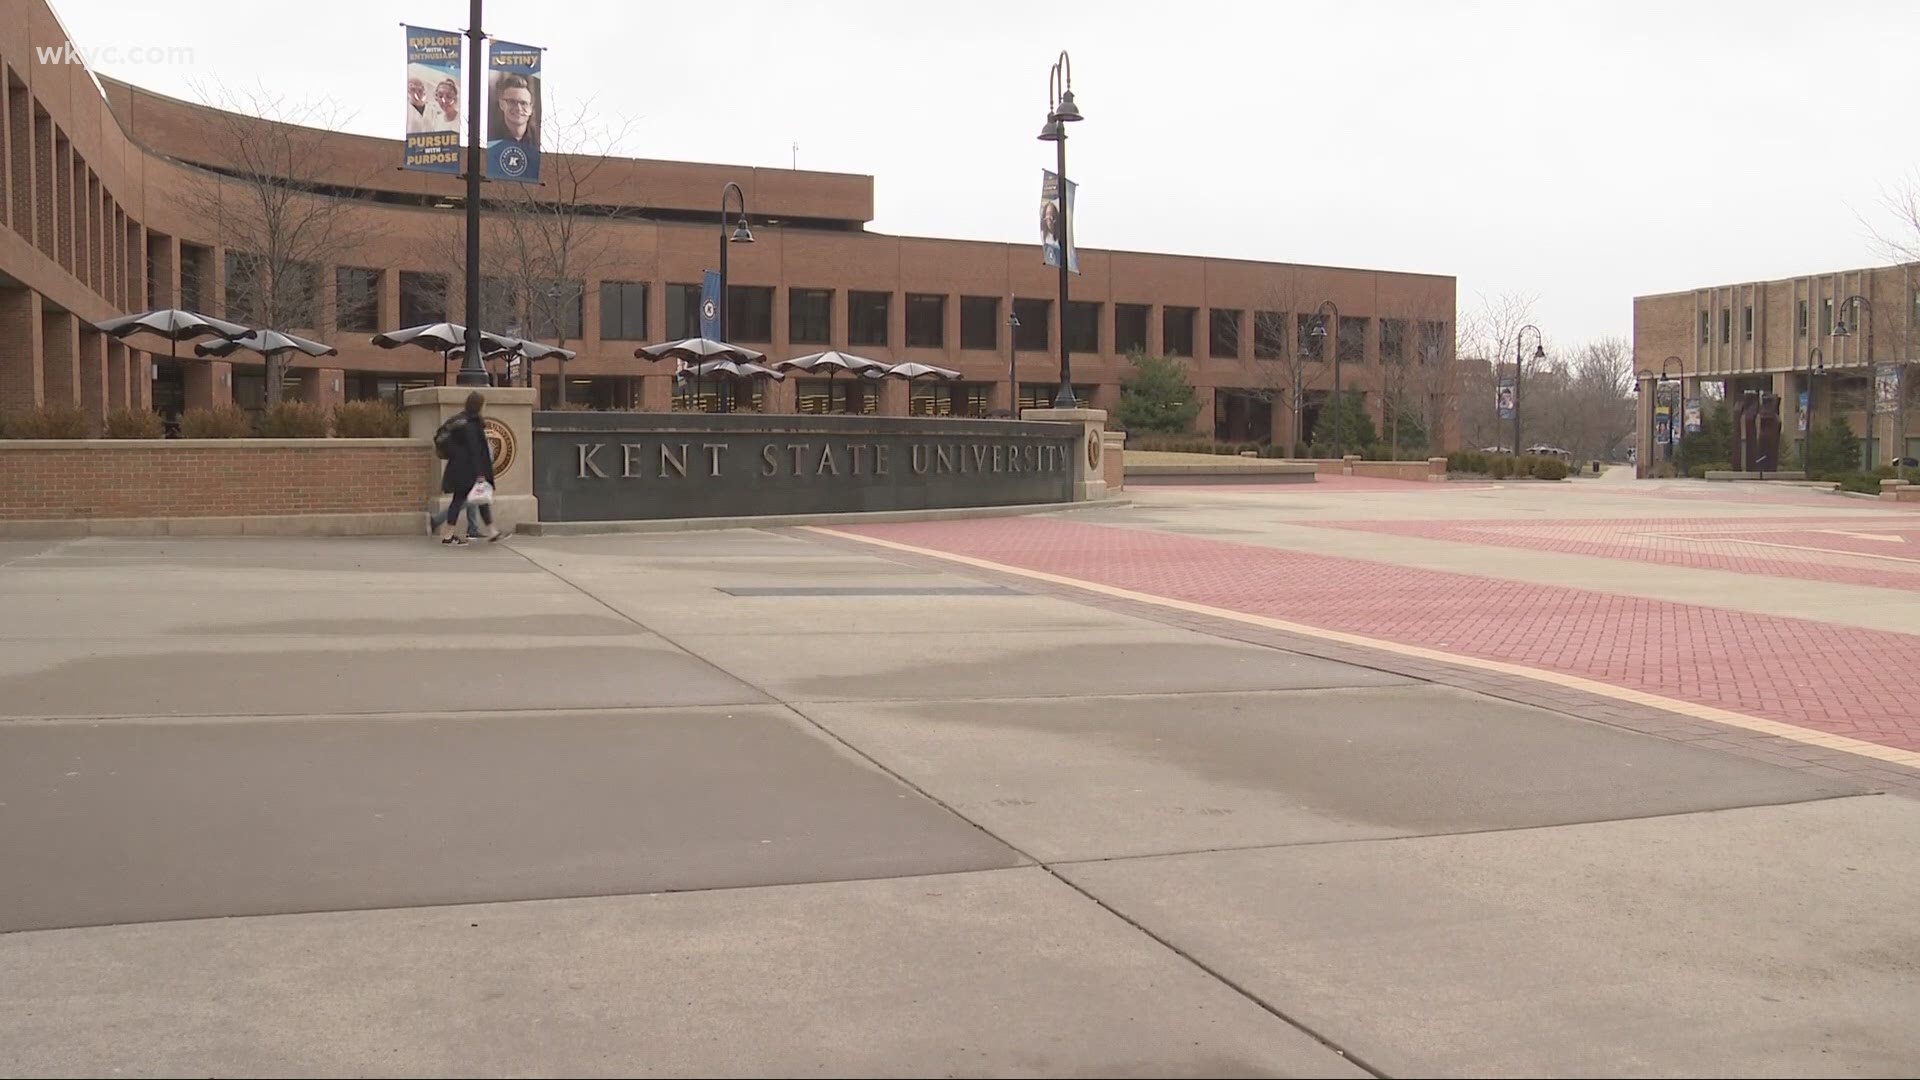 Classes begin January 19th. How leaders at Kent State University will keep students safe amid the pandemic.